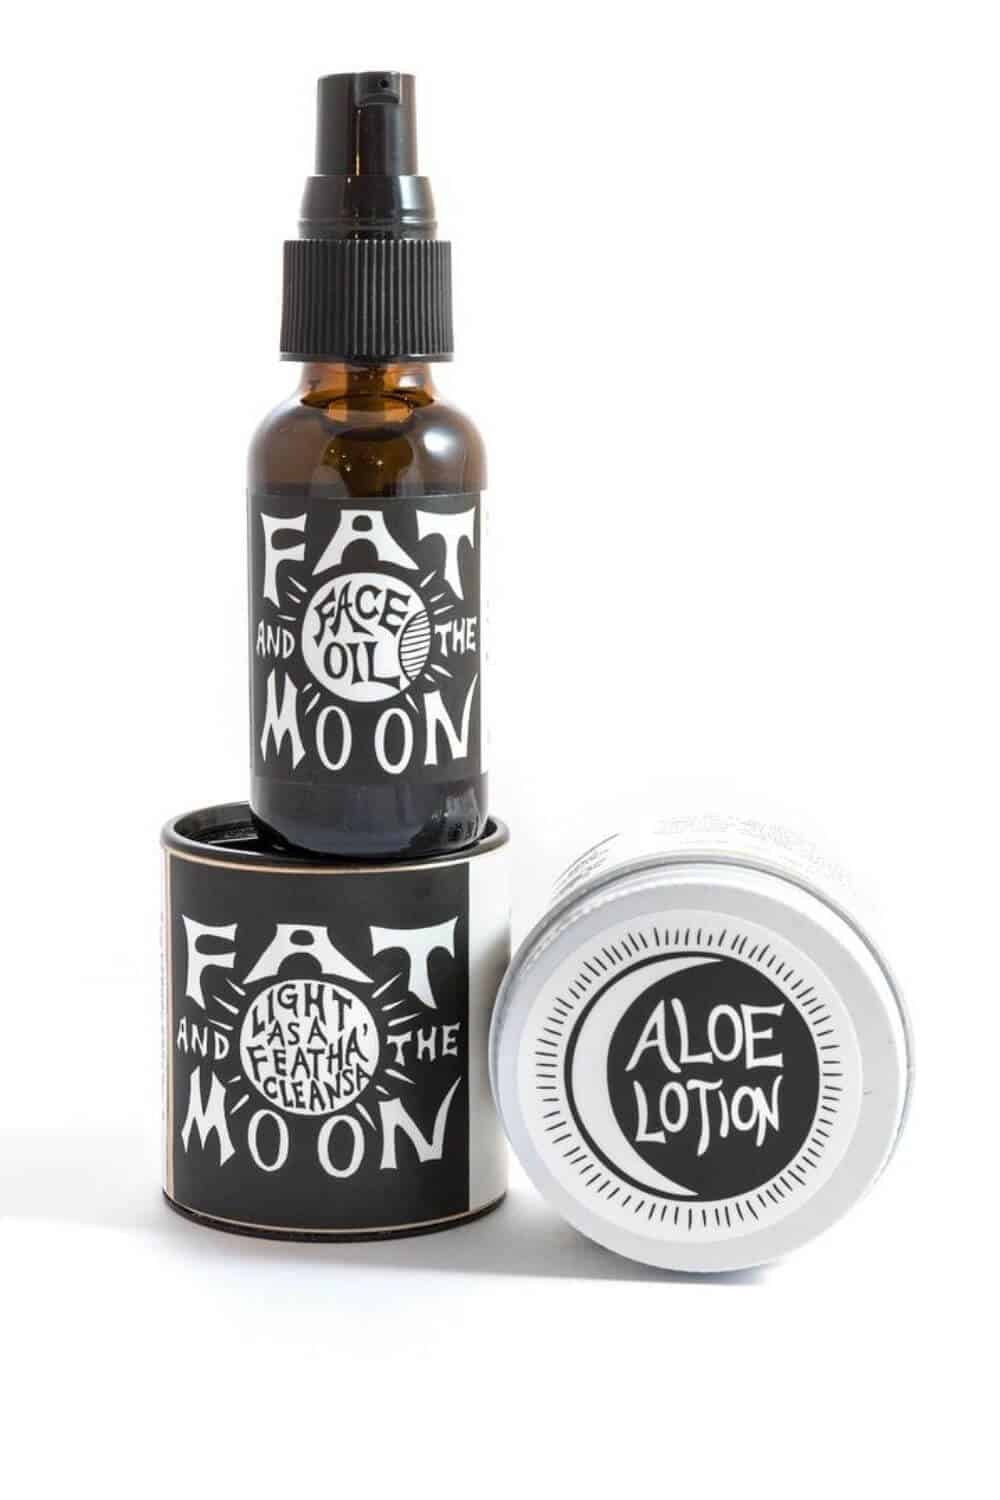 We've covered lots of great zero waste beauty products that are better for you AND the environment. Now we're narrowing it down to the best of the best. Image by Fat And The Moon #zerowastebeauty #sustainablebeauty